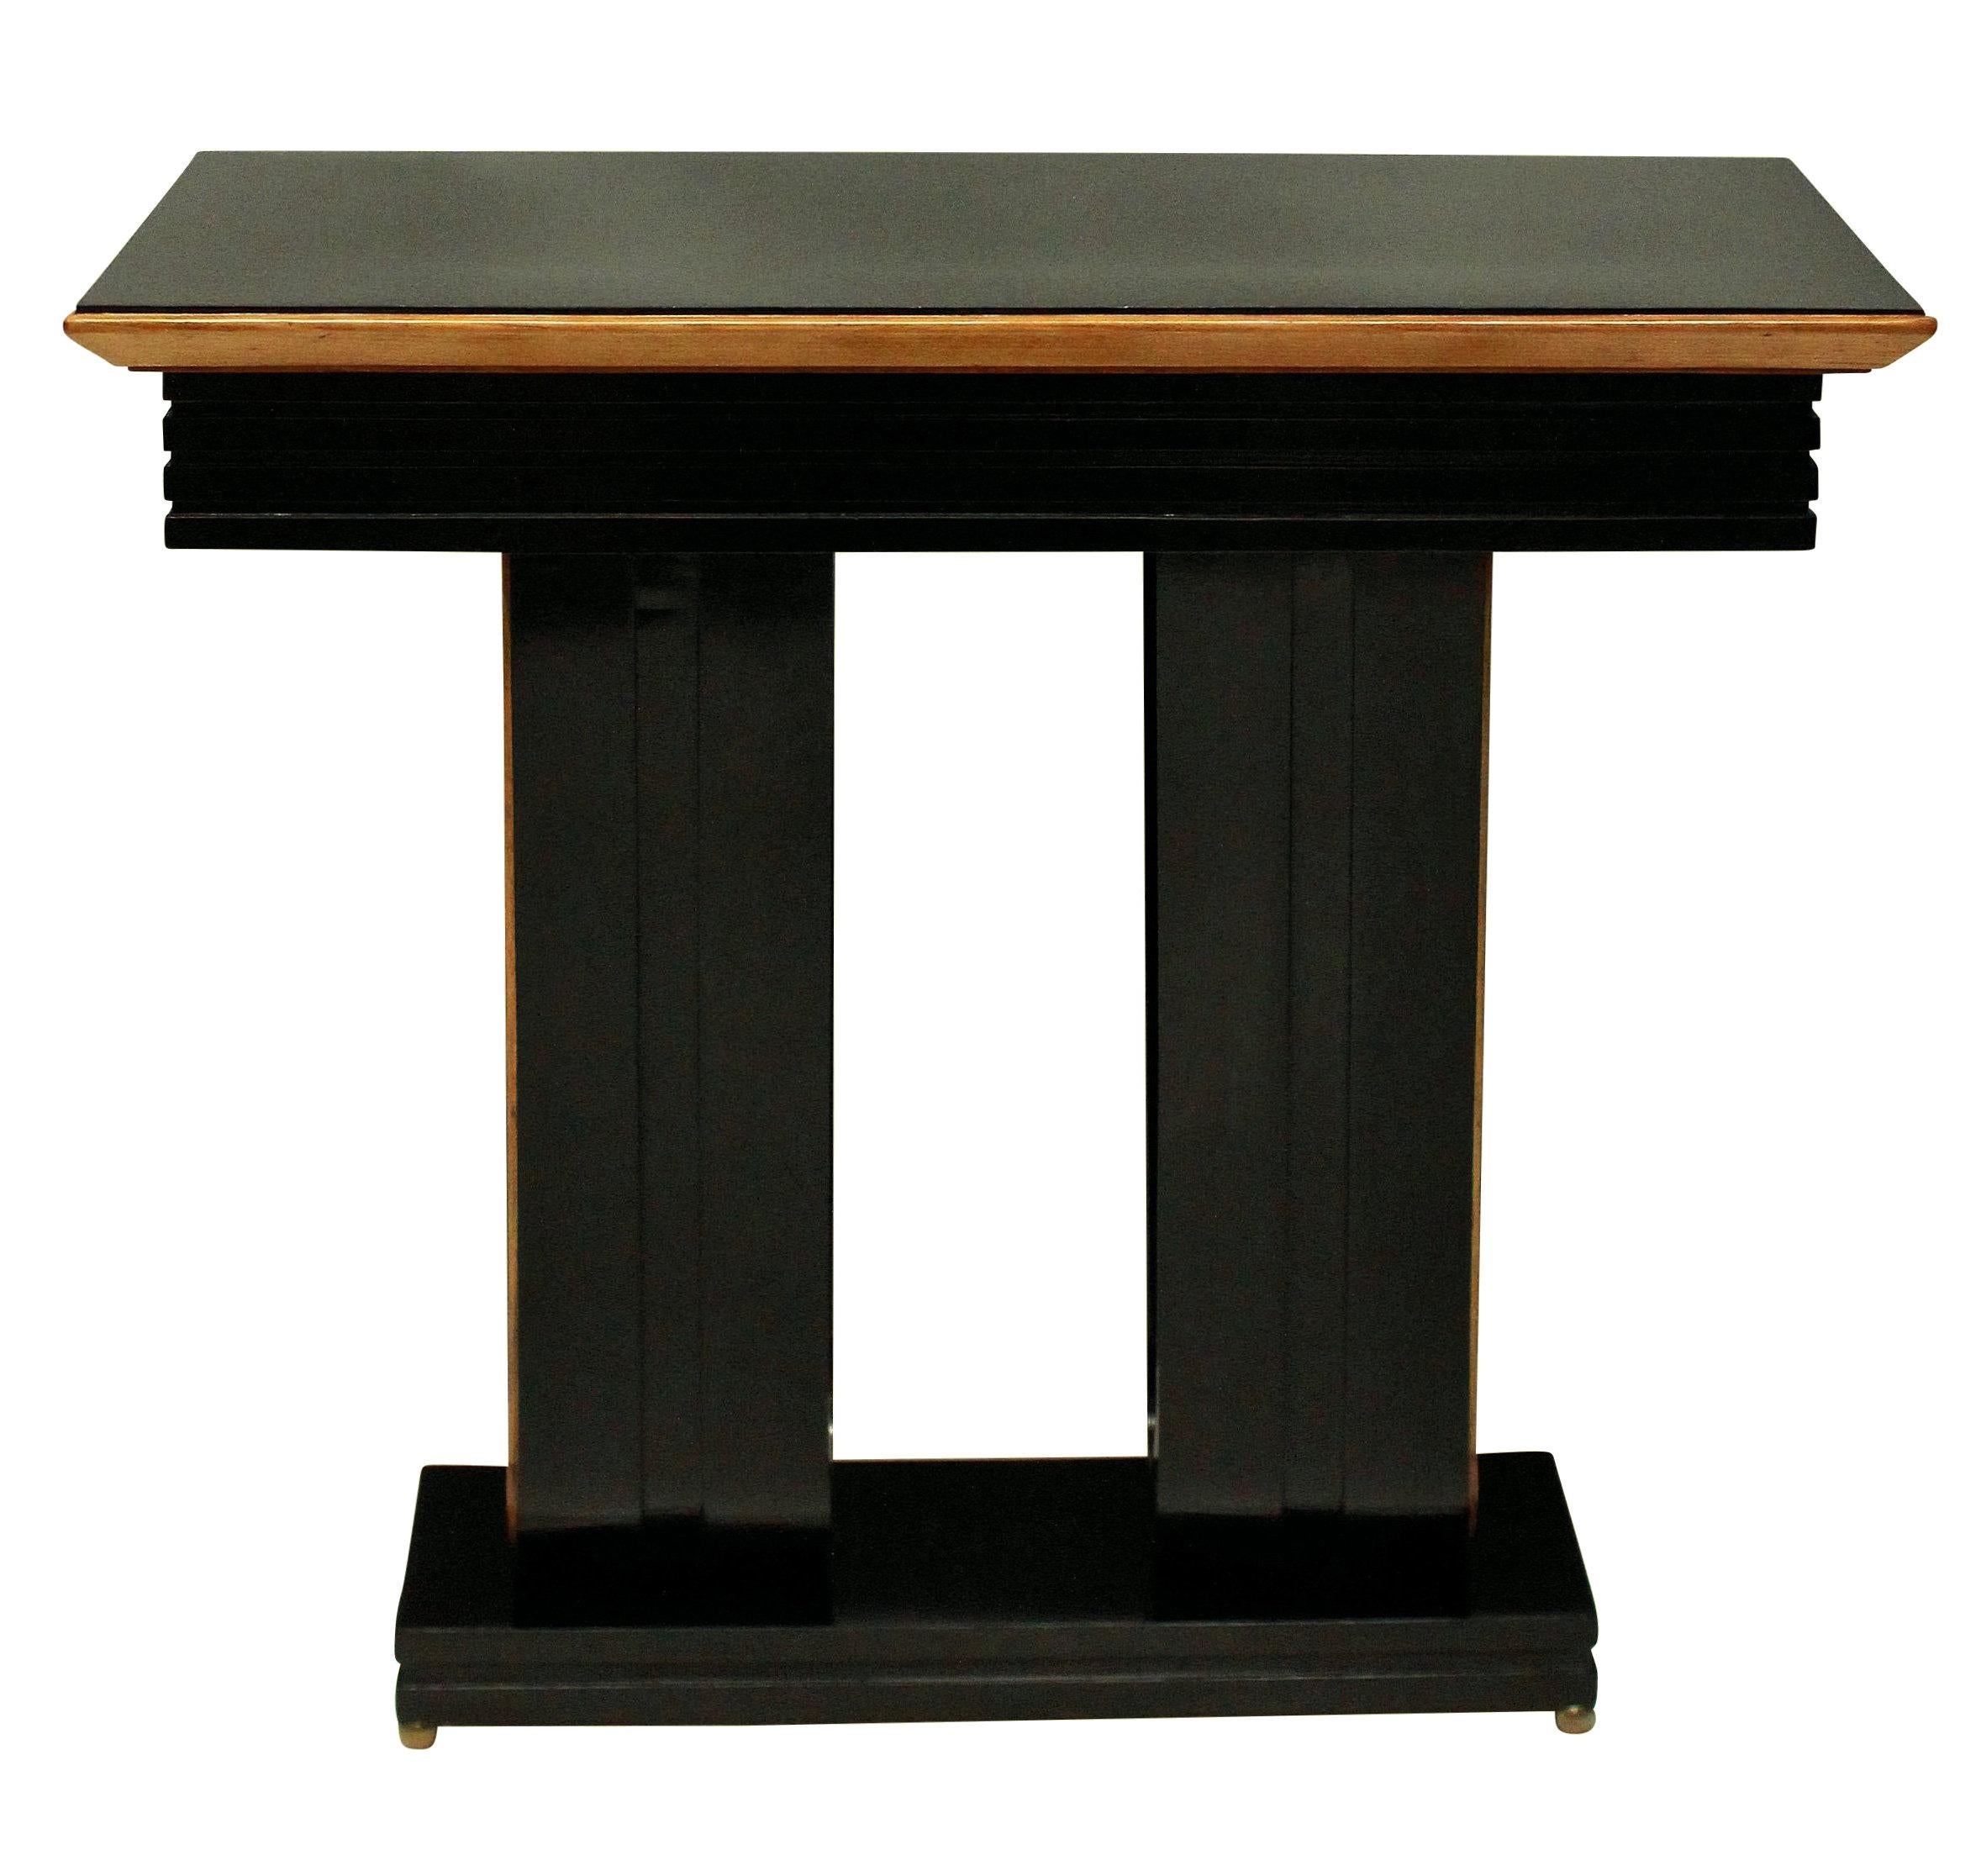 A pair of stylish Italian ebonized console tables with lemon wood detailing and on brass ball feet.